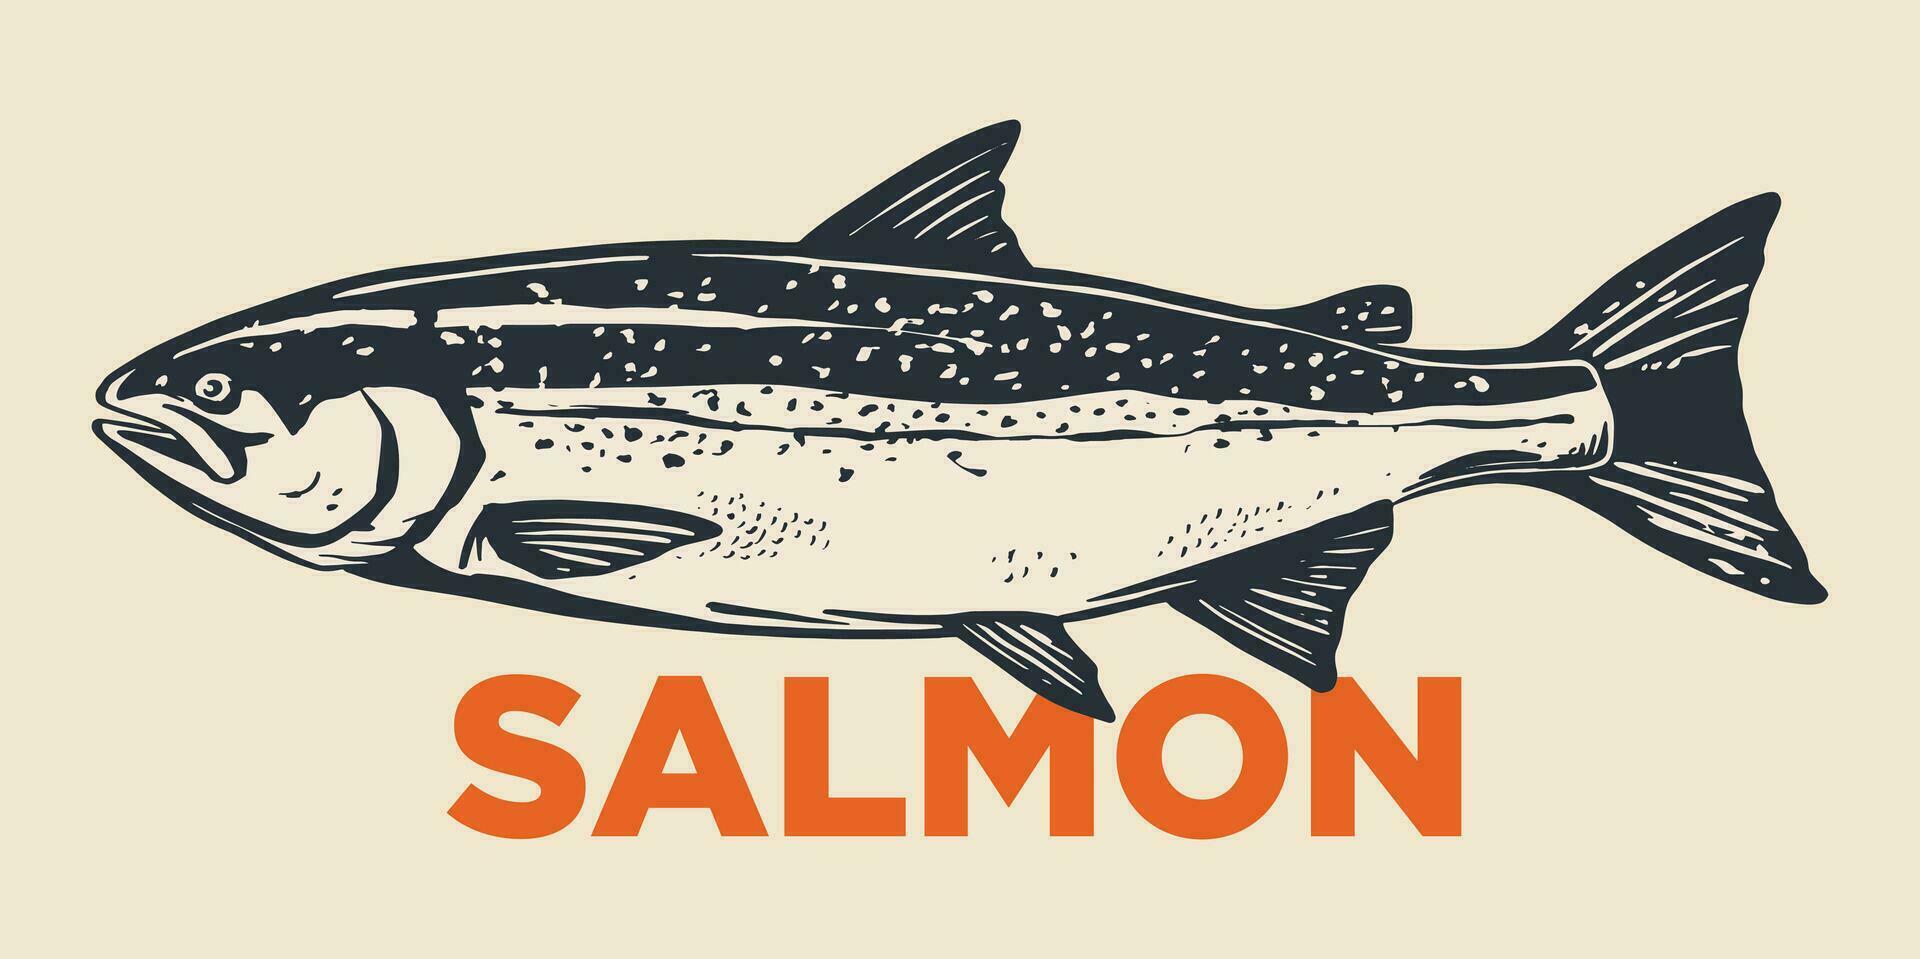 Salmon fish retro line ink sketch. Hand drawn vector illustration of fish isolated.